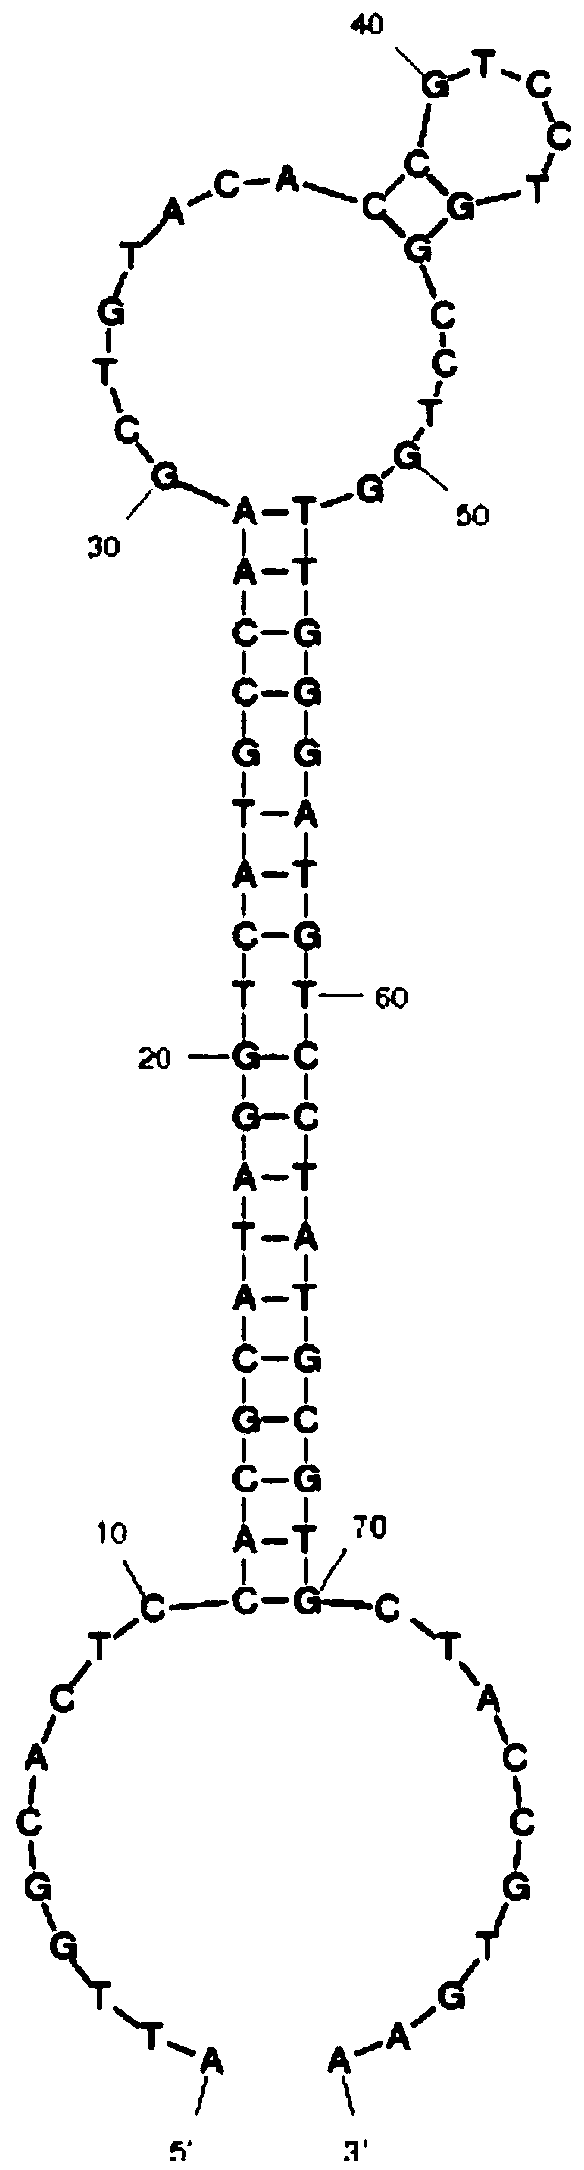 Nucleic acid aptamer for detecting clenbuterol hydrochloride and screening method and application thereof